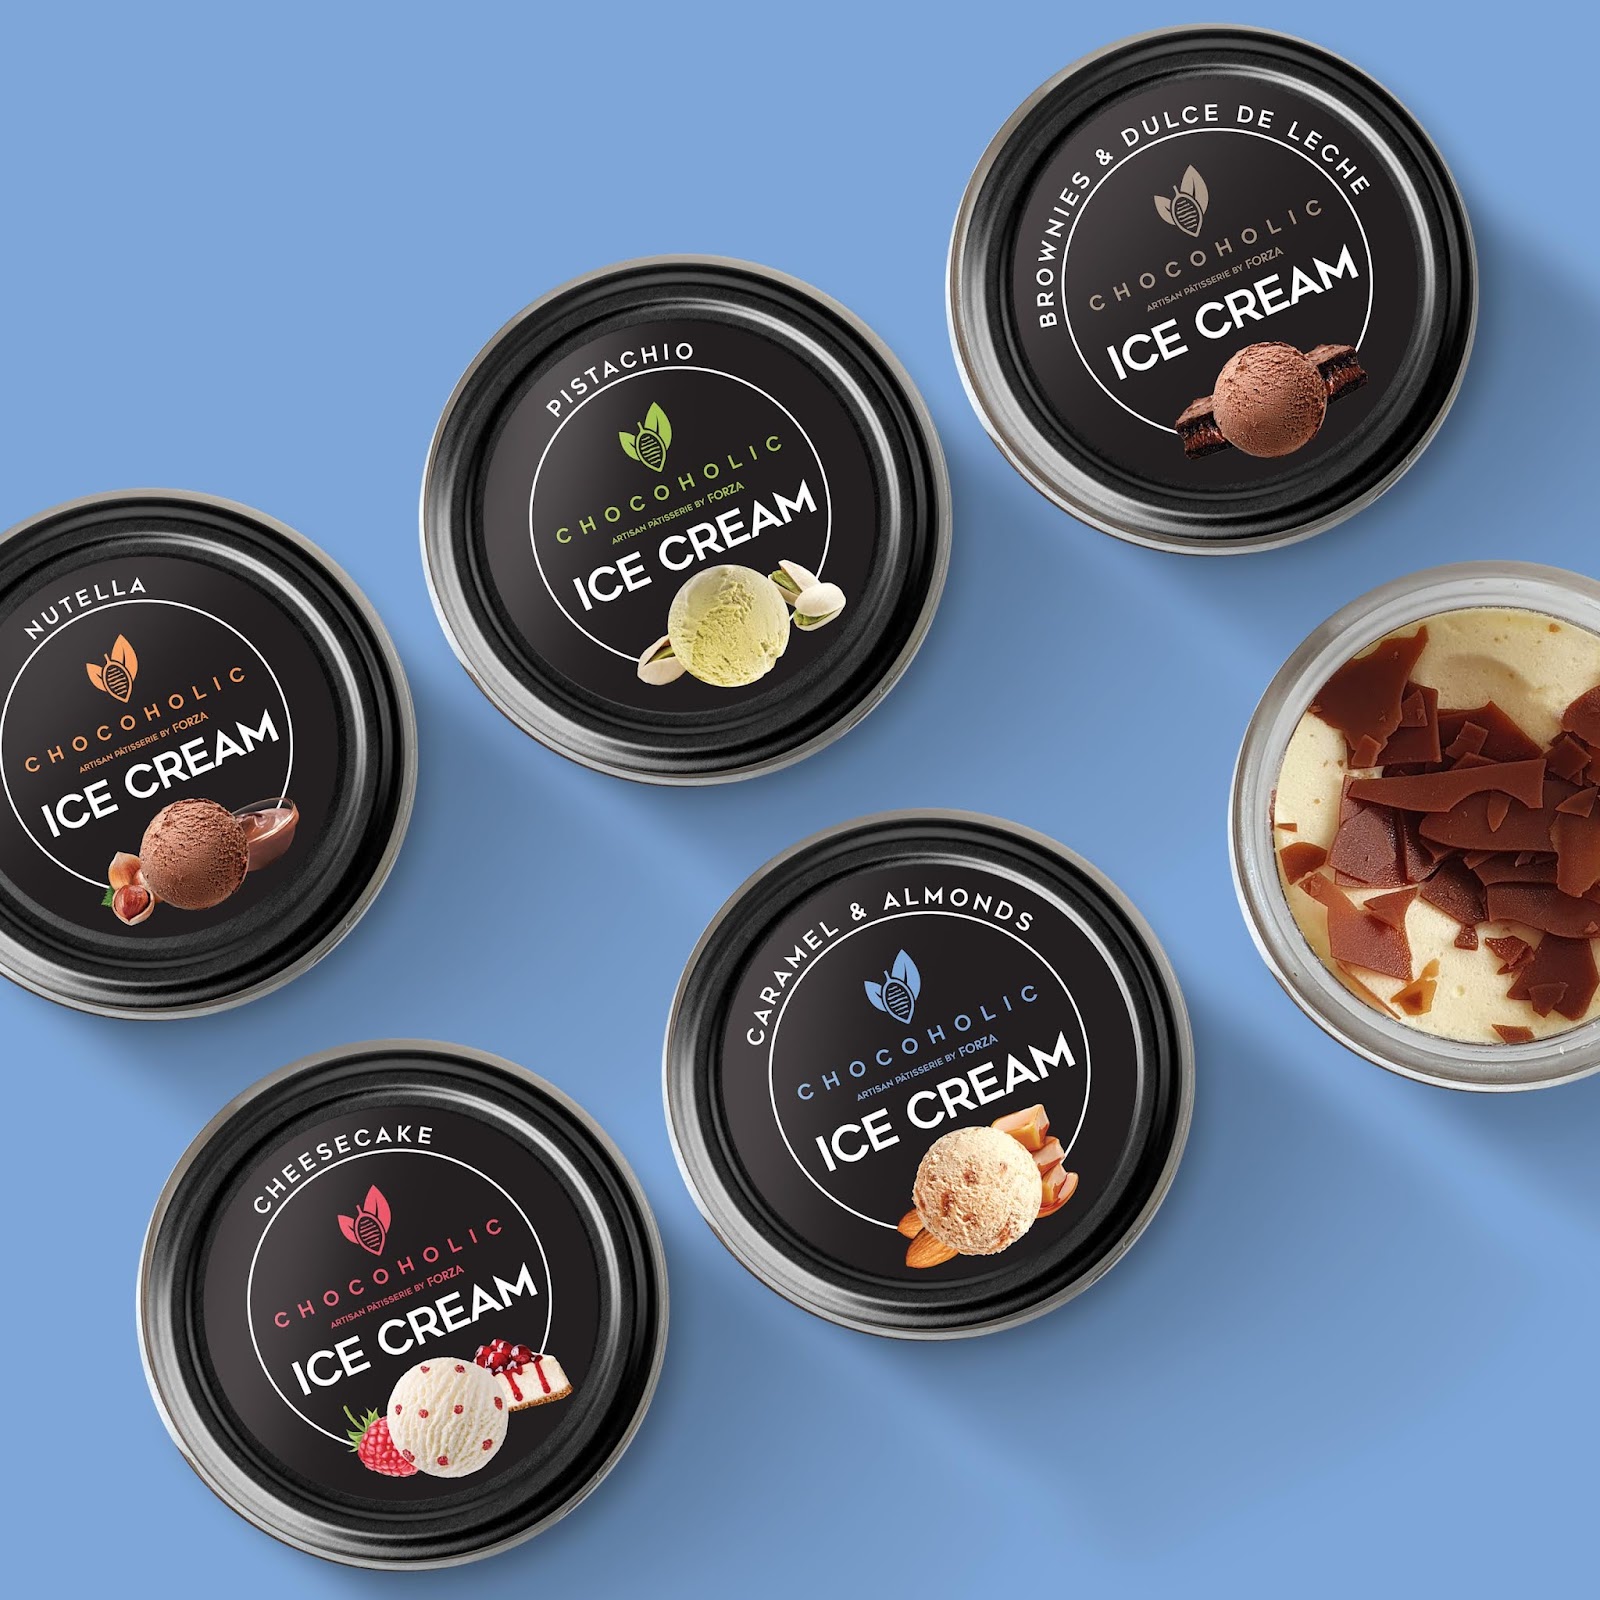 E-40 Launches New Ice Cream With Six Different Flavors As Part of